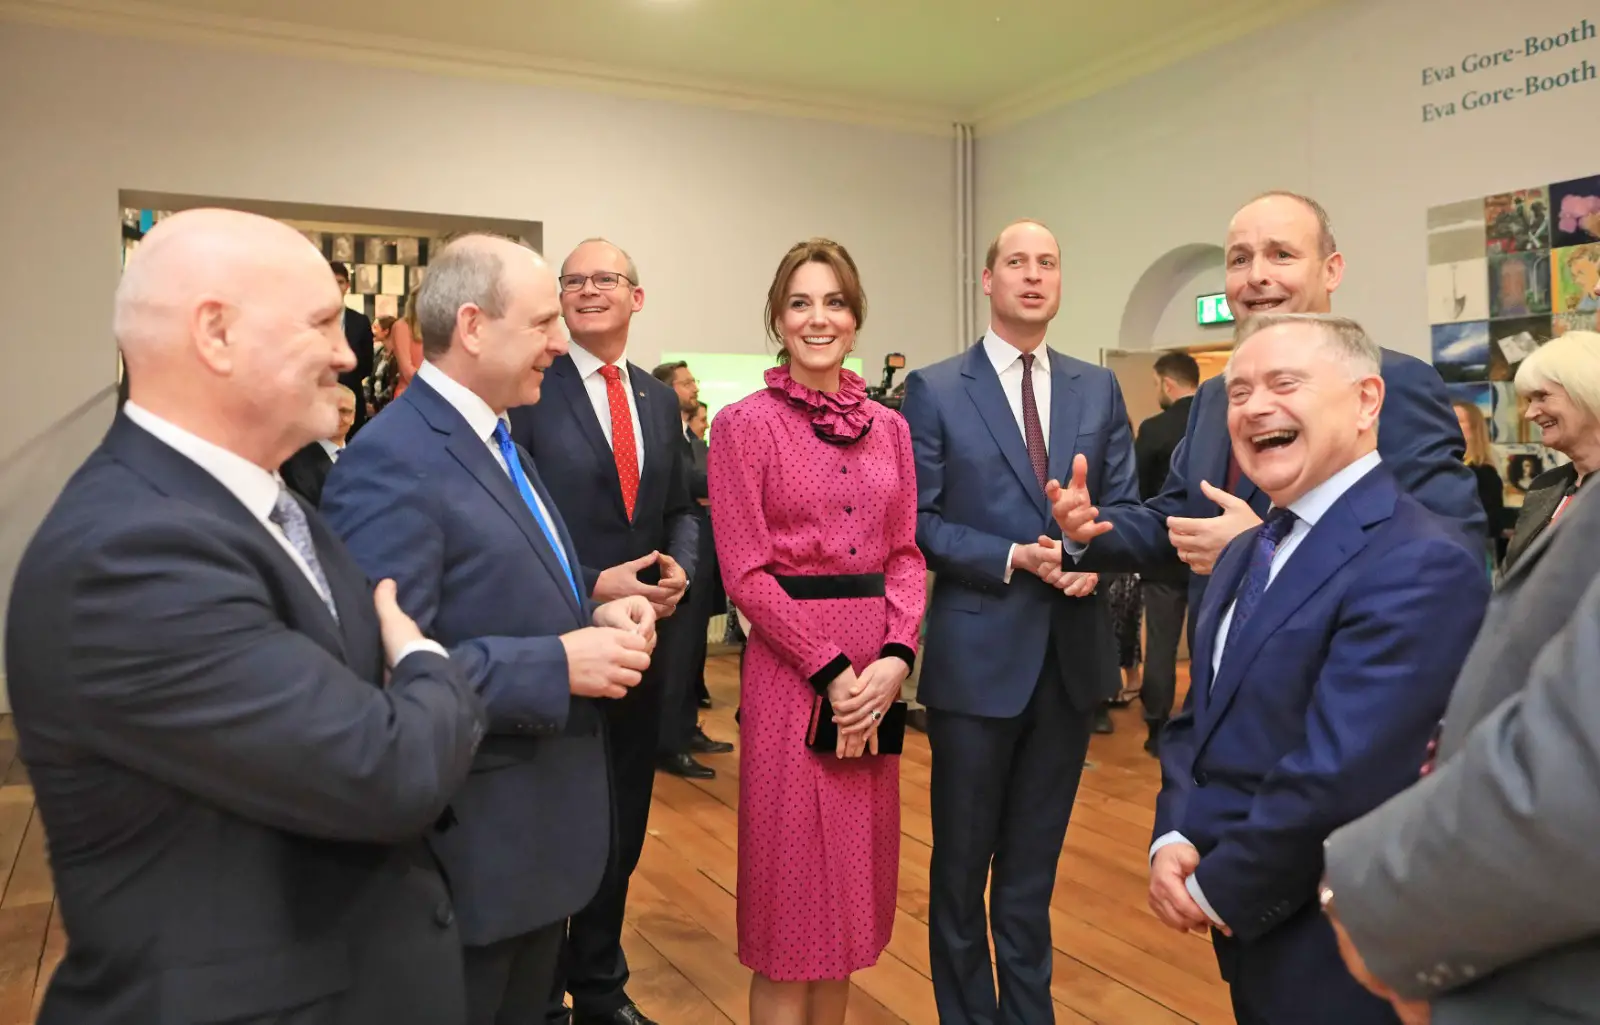 The Duke and Duchess of Cambridge attended the reception hosted at he Museum of Literature Ireland